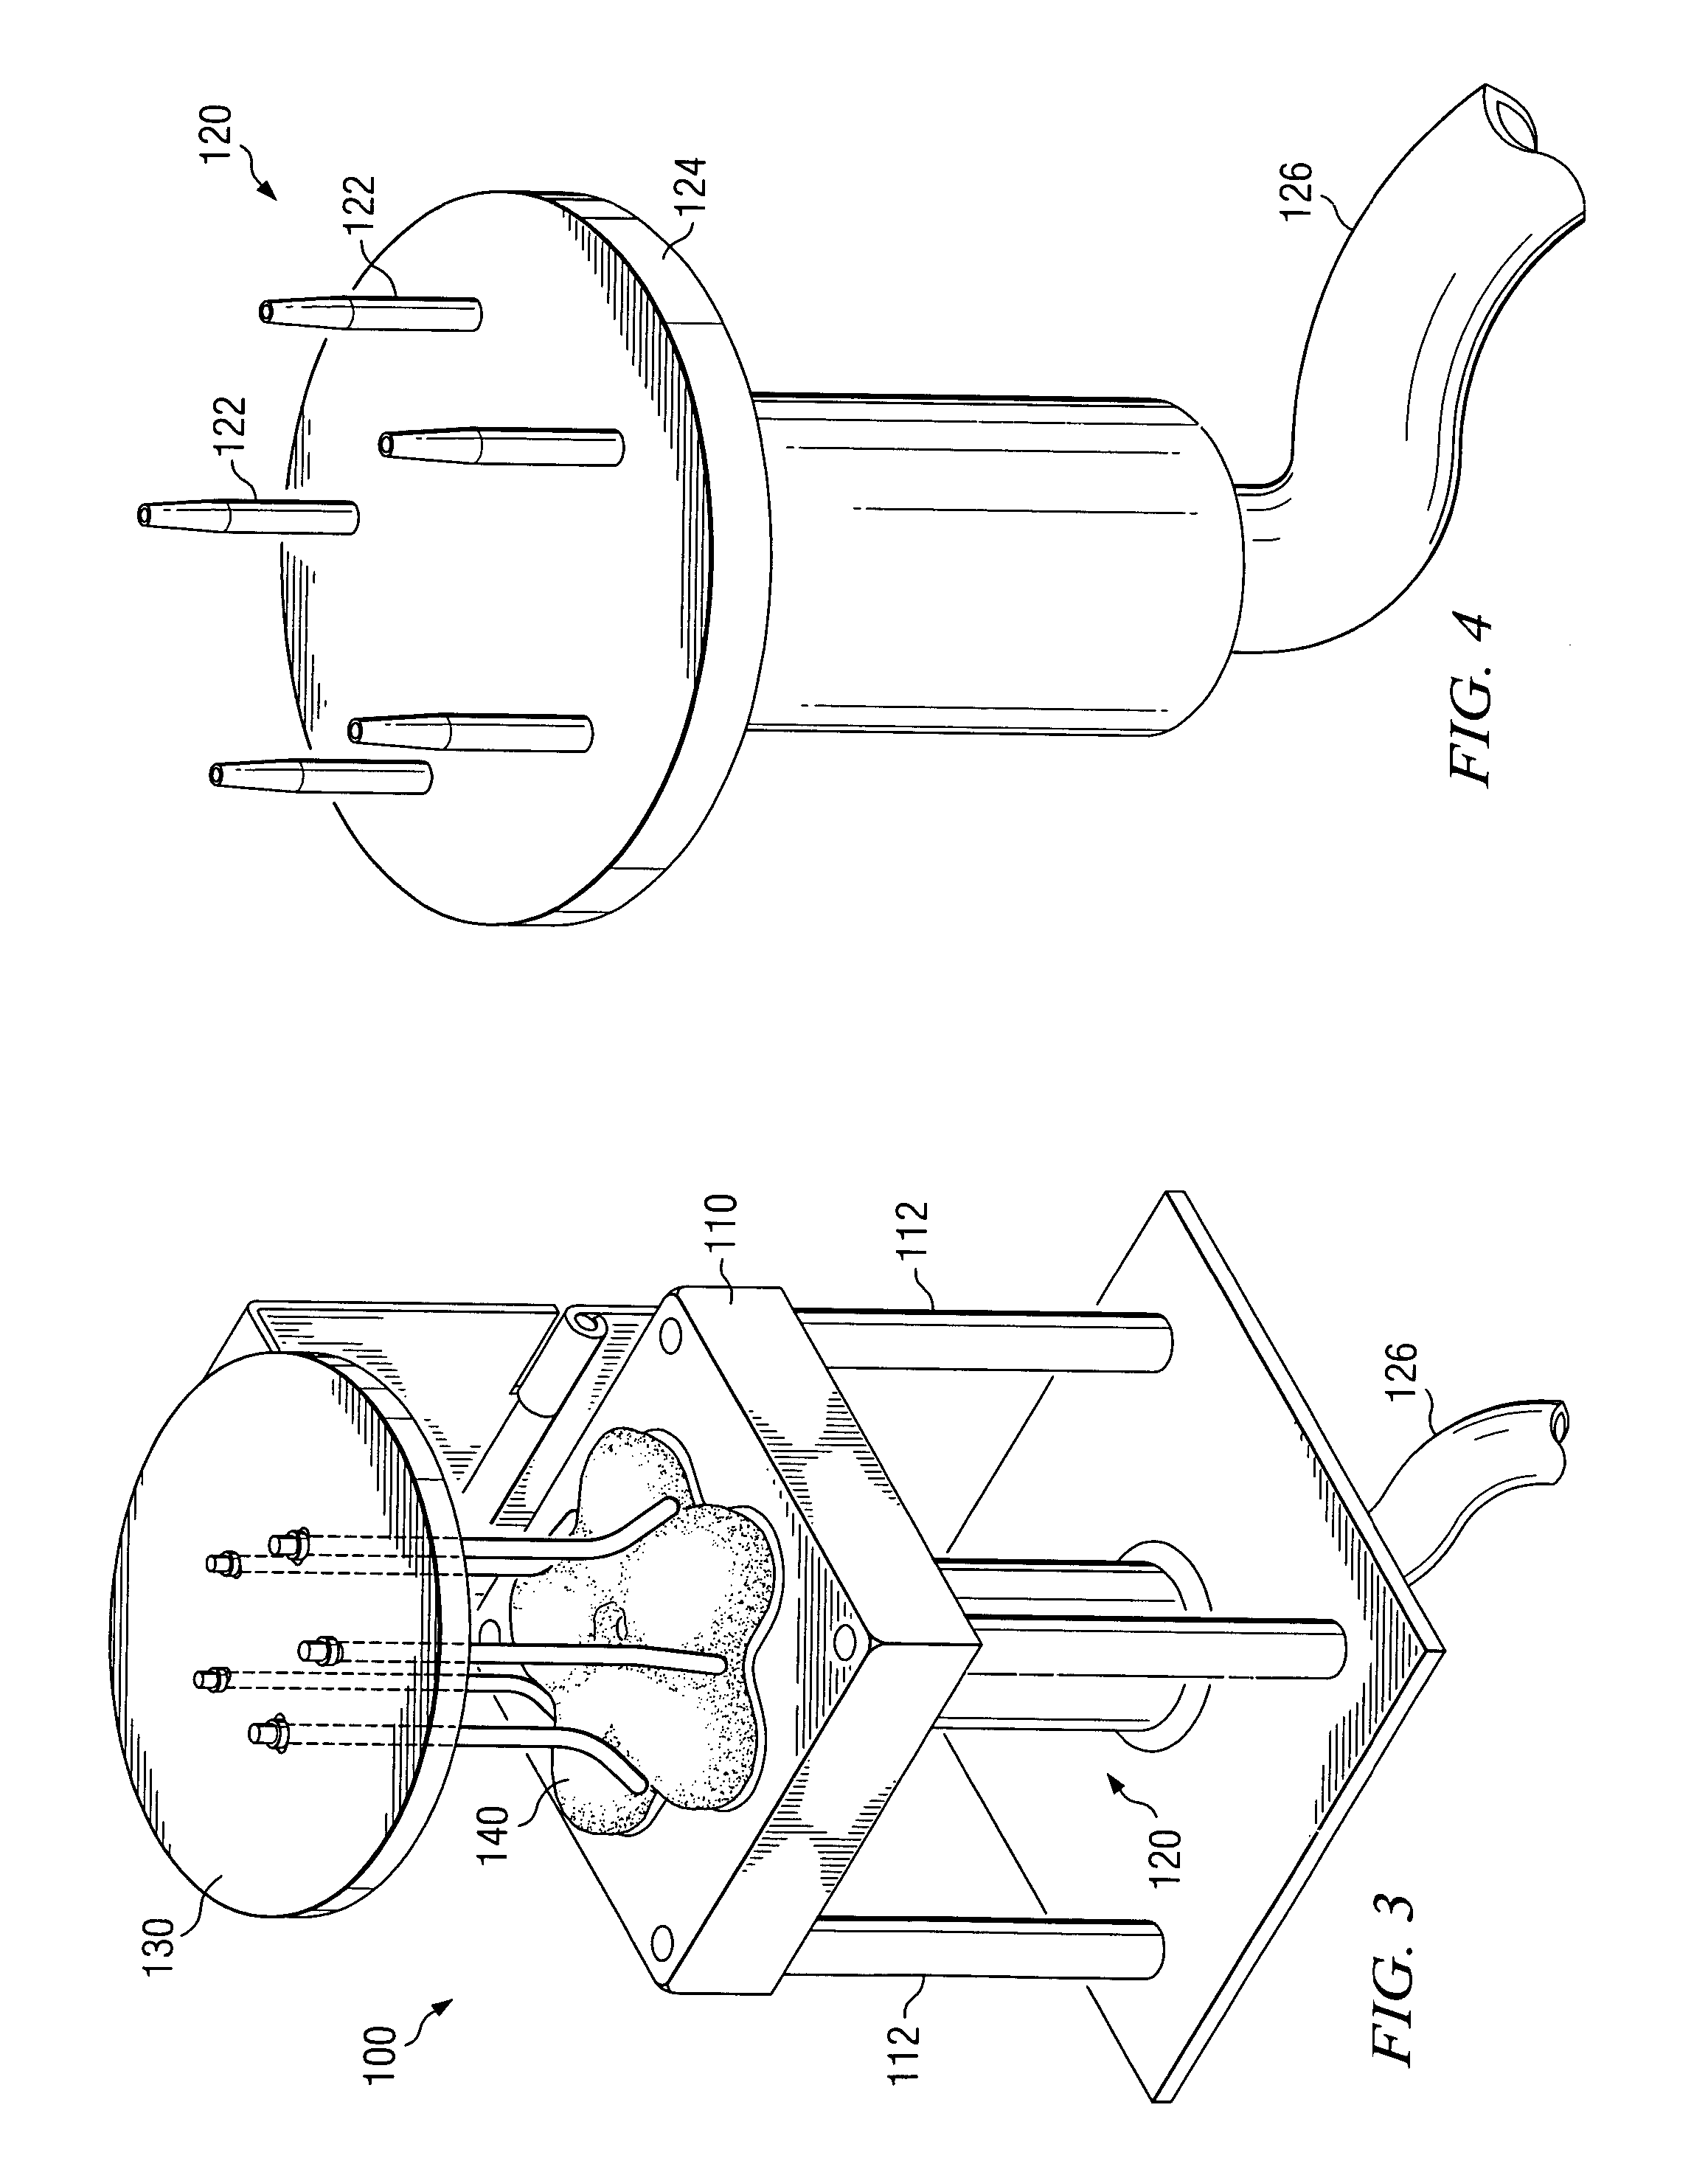 Automatic bottom-filling injection system